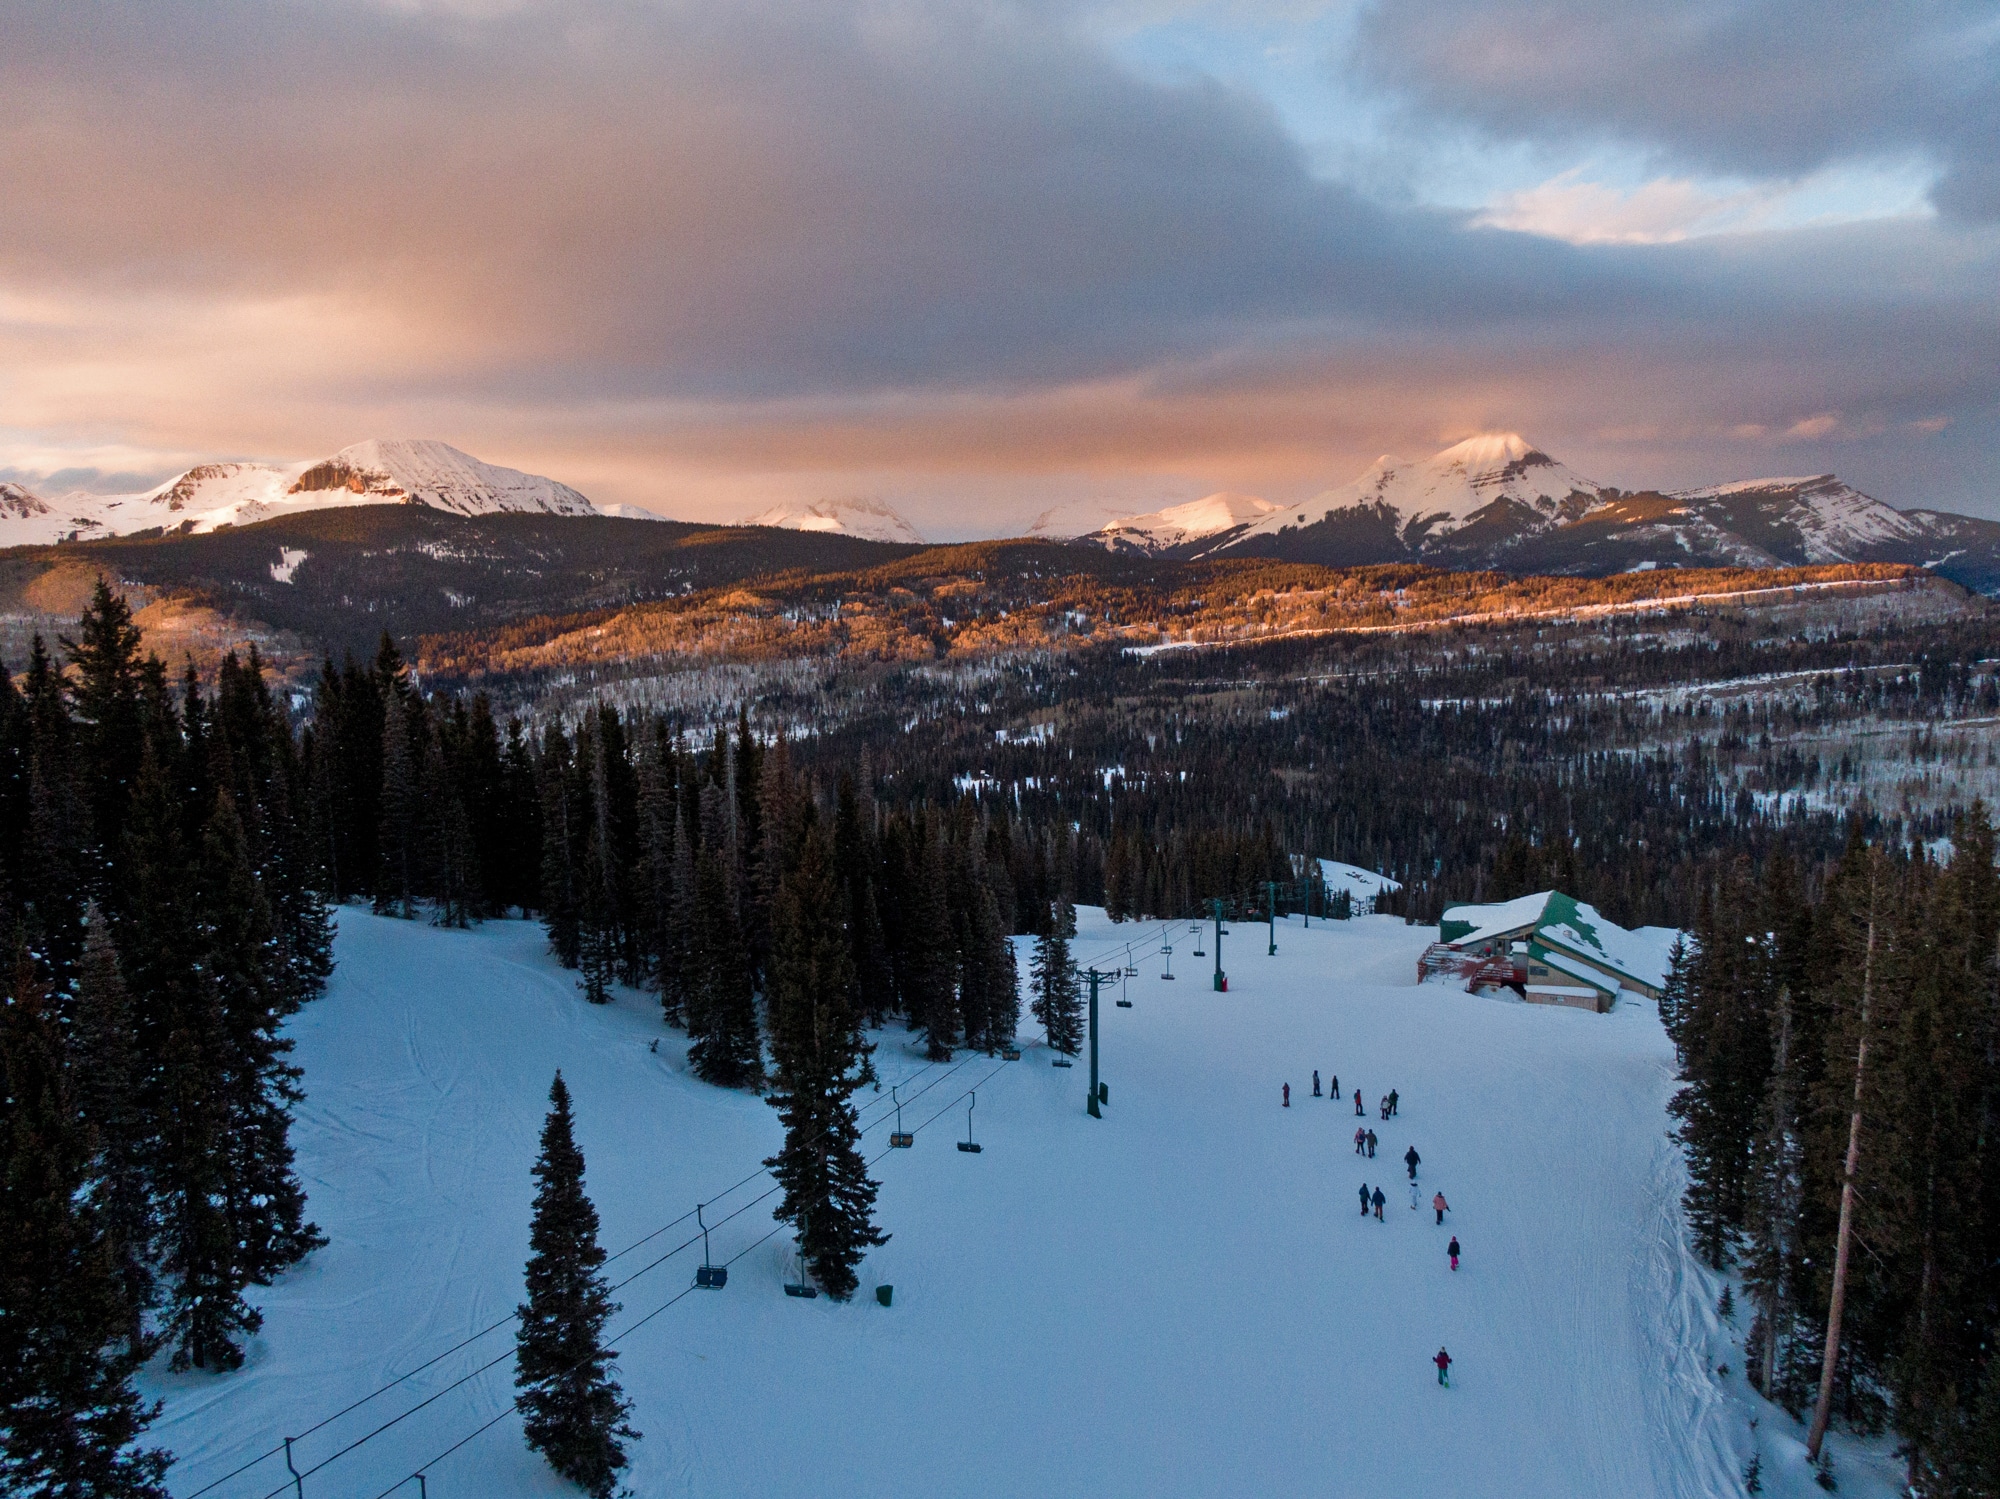 As the sunsets during a snowshoe tour, guest are treated to the unbelievable beauty of the San Juan Mountains